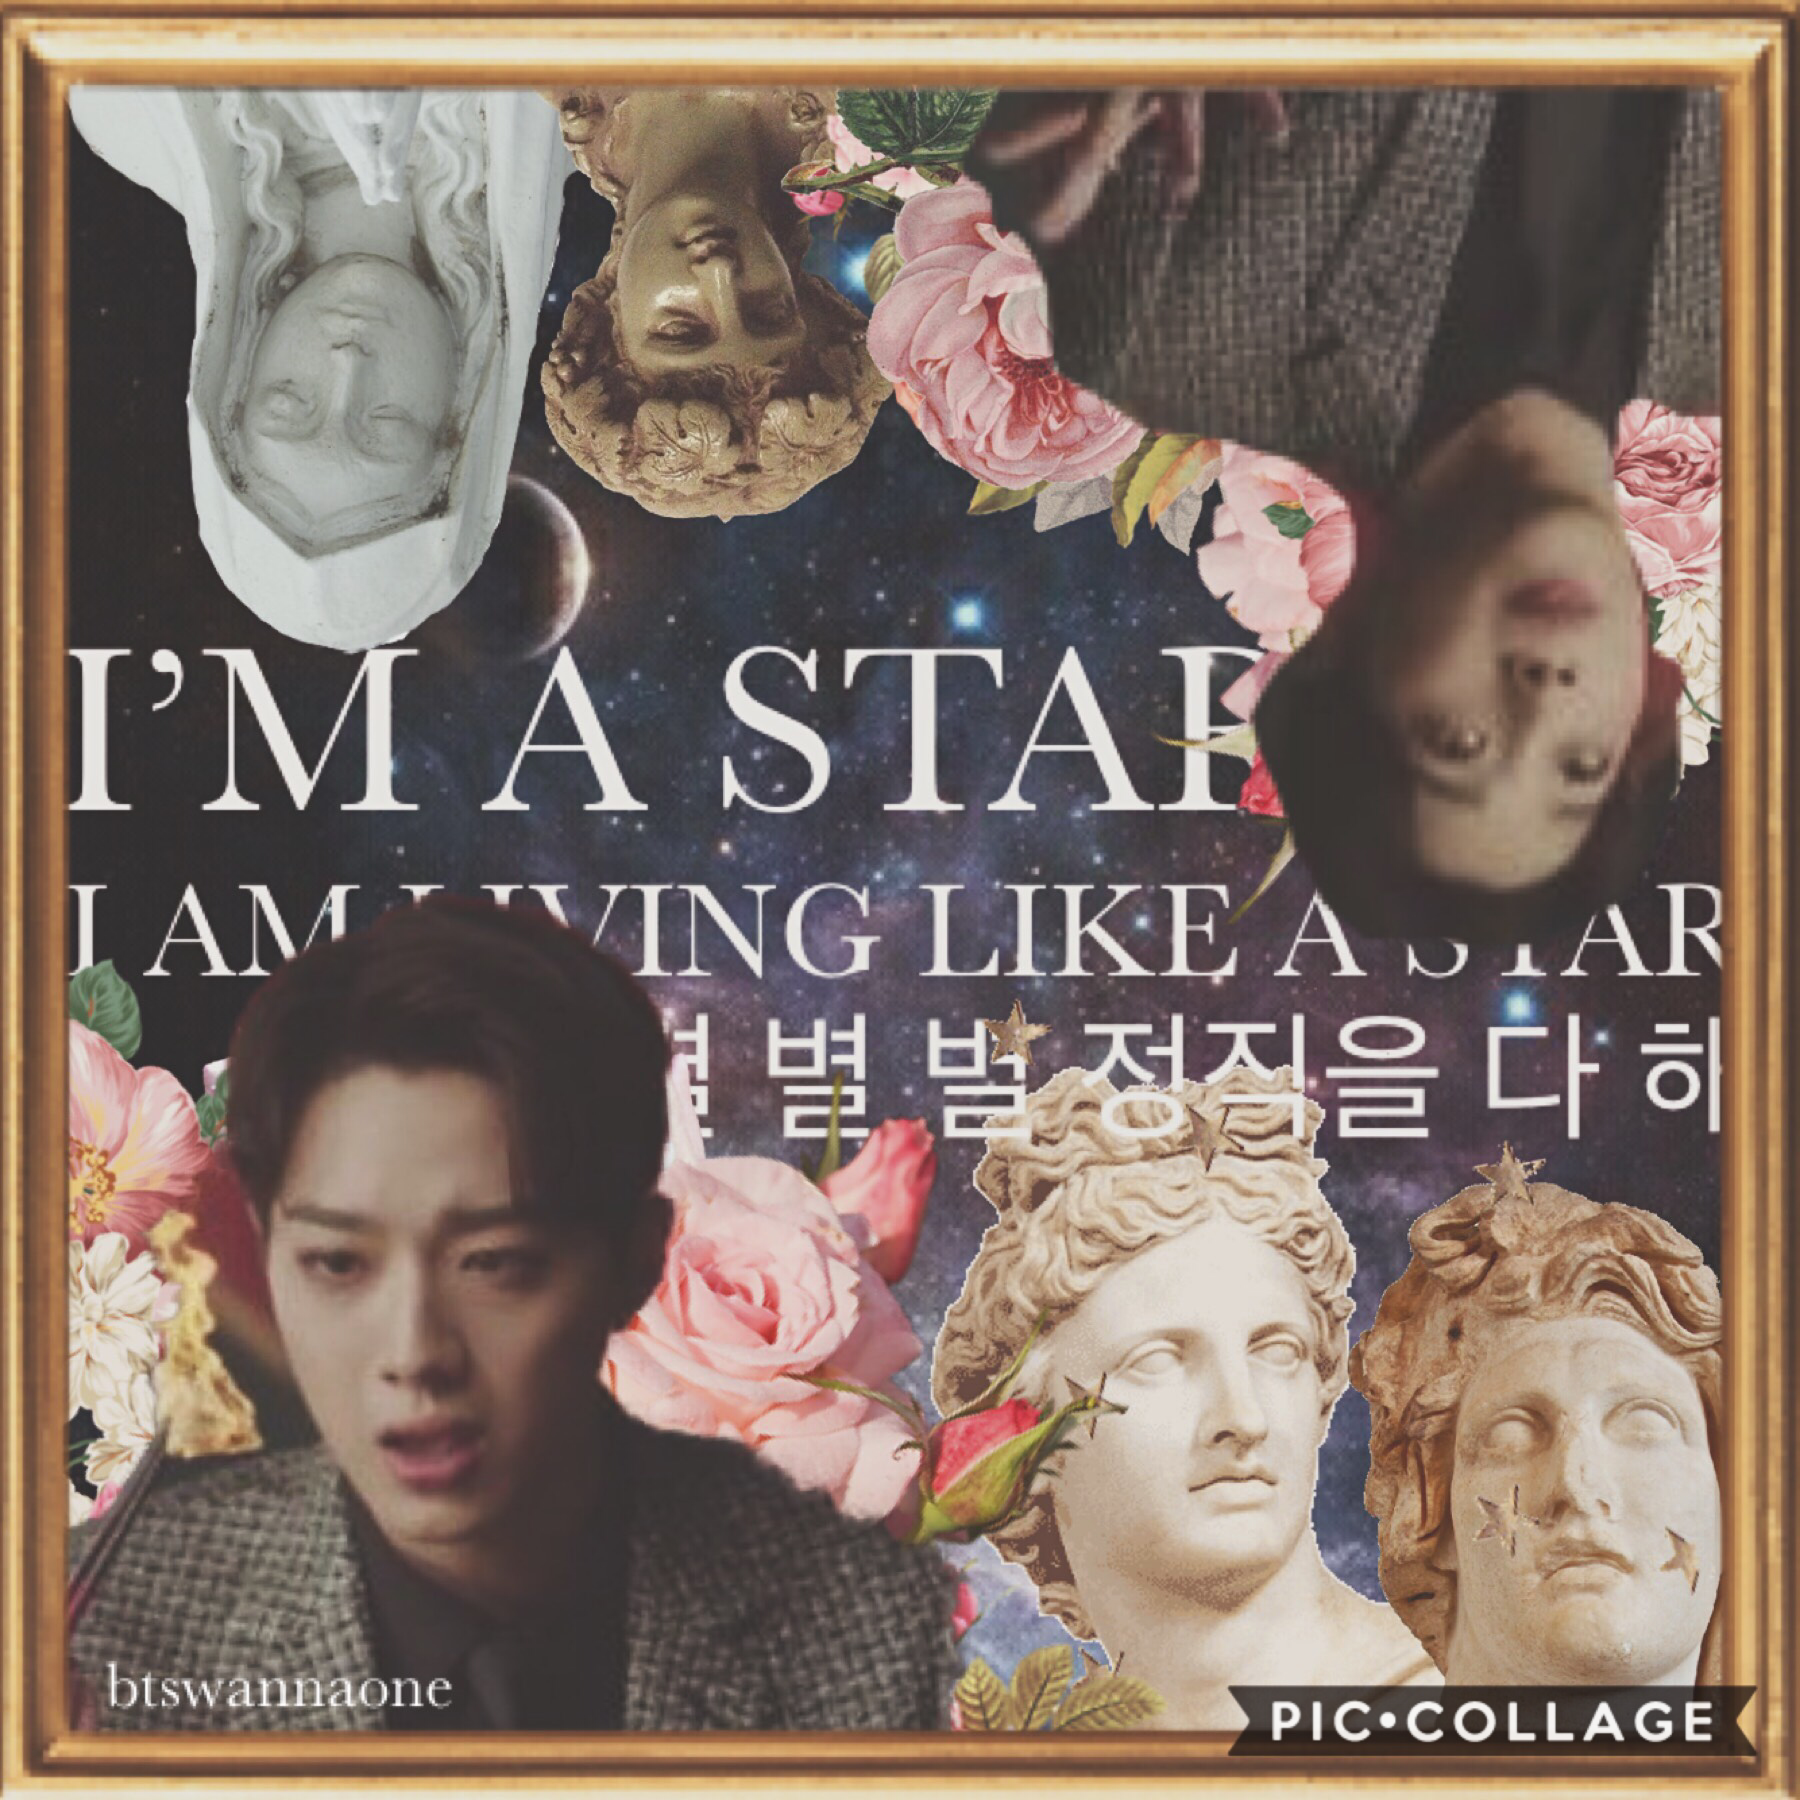 TAP
OMG I COULDN’T RESIST MAKING AN EDIT FOR THIS! AGH I LOVE KUANLIN SO MUCH IN THIS MV! I love wooseok too. I AM SO PROUD OF KUANLIN!!! The edit itself is really bad though... sorry. 👏🏻👏🏻👏🏻